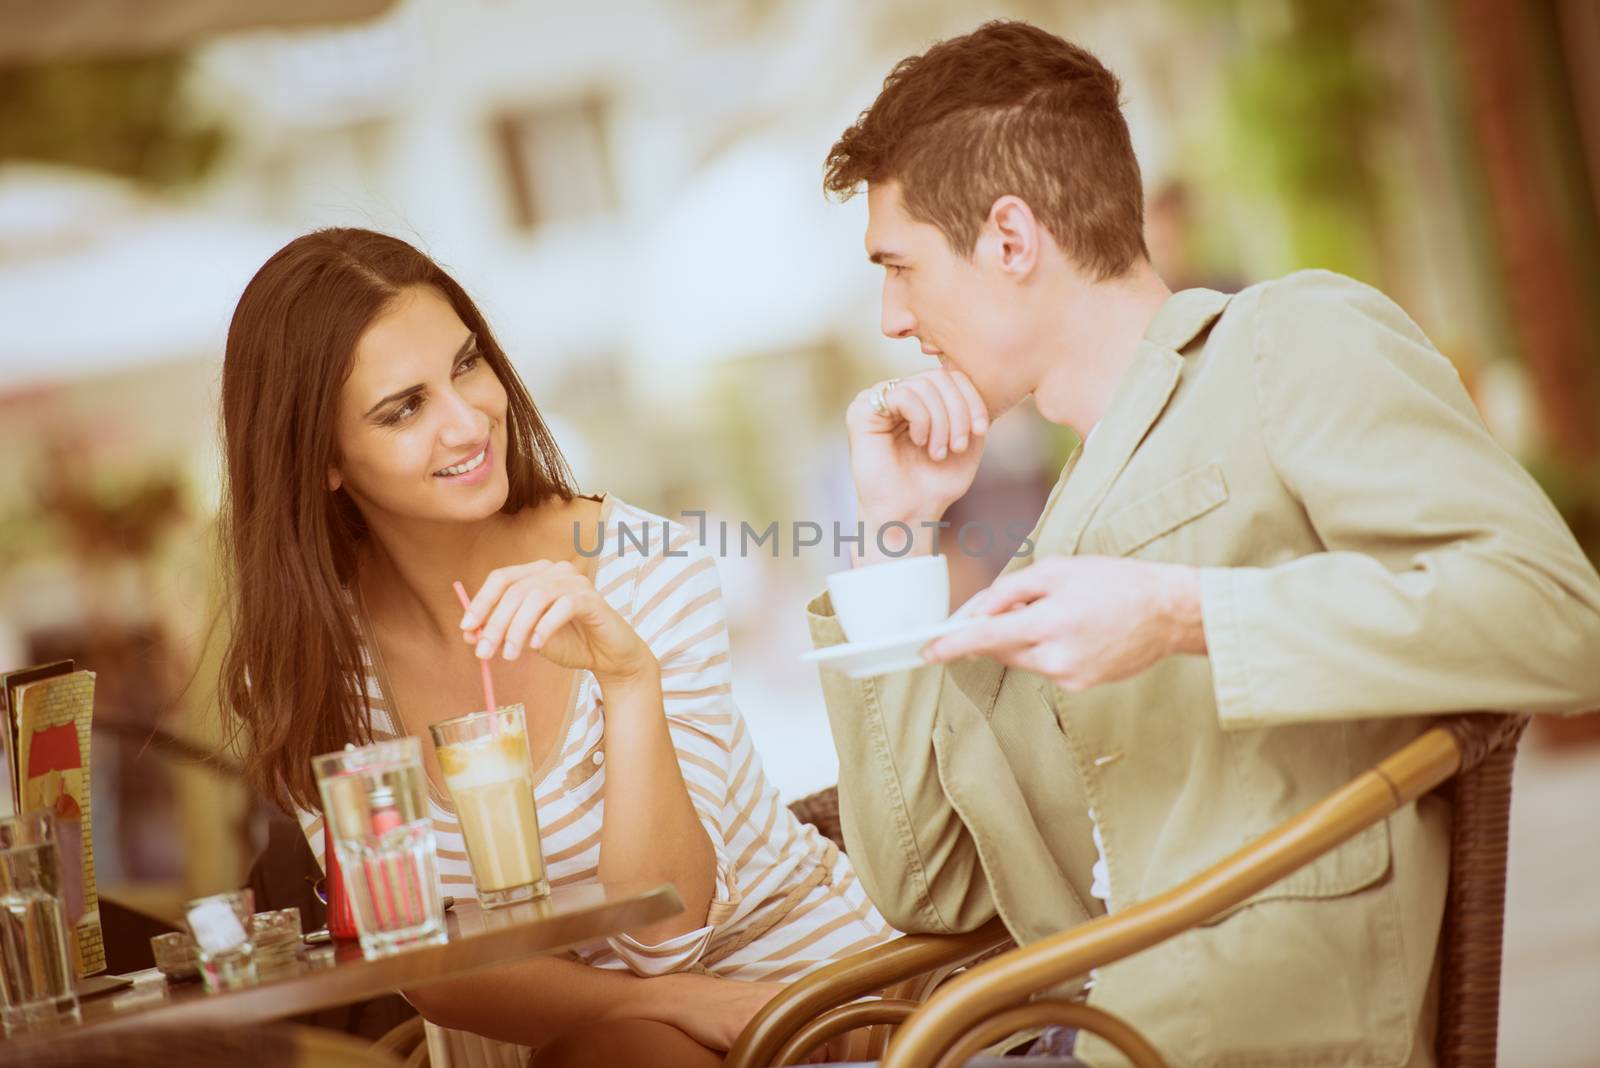 Young couple in garden cafe flirts and enjoys the coffee.